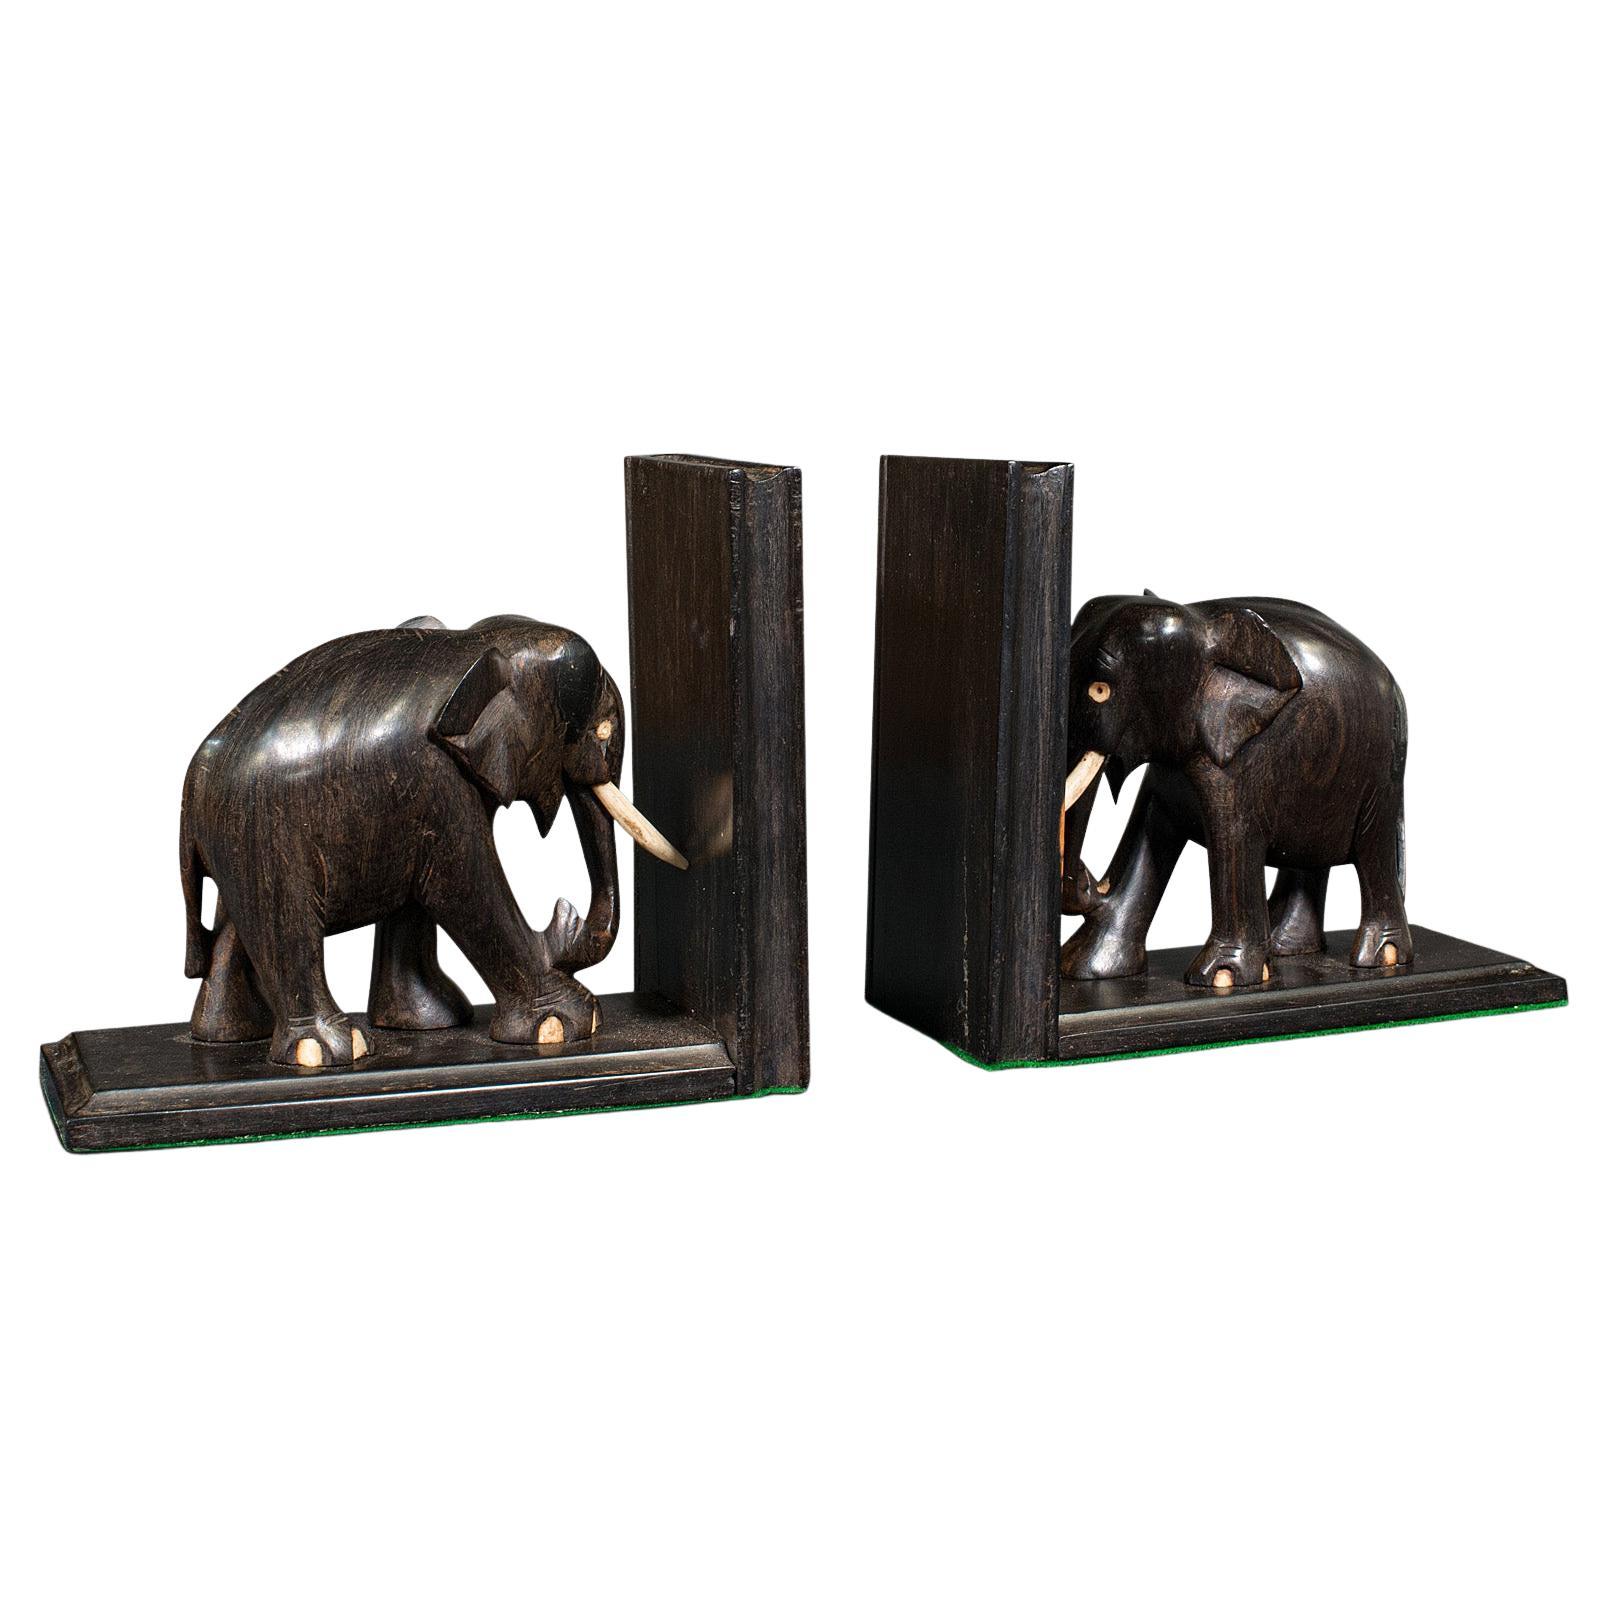 Pair of Small Antique Elephant Bookends, Anglo Indian, Ebony, Victorian, C.1890